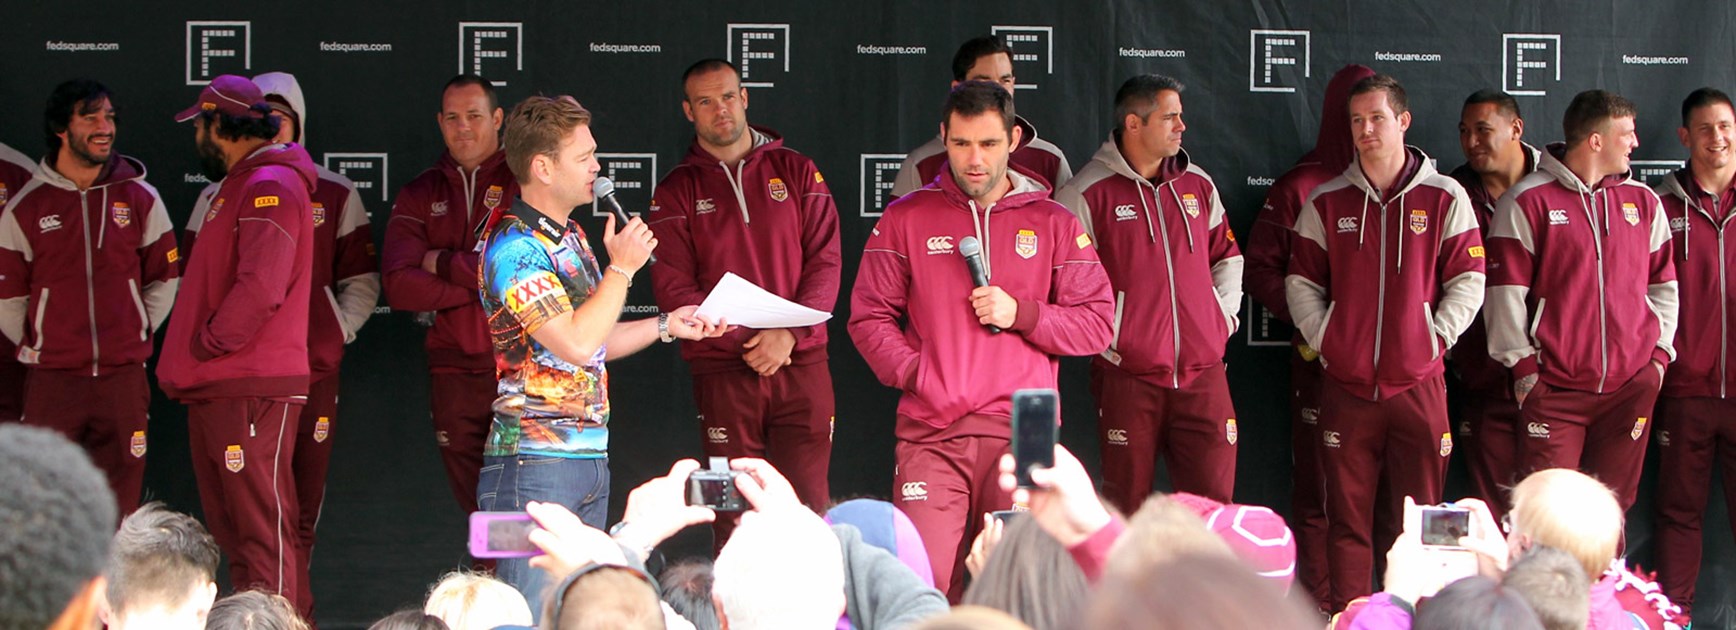 The Queensland side set up camp in Melbourne ahead of the second game of the 2015 Holden State of Origin series.